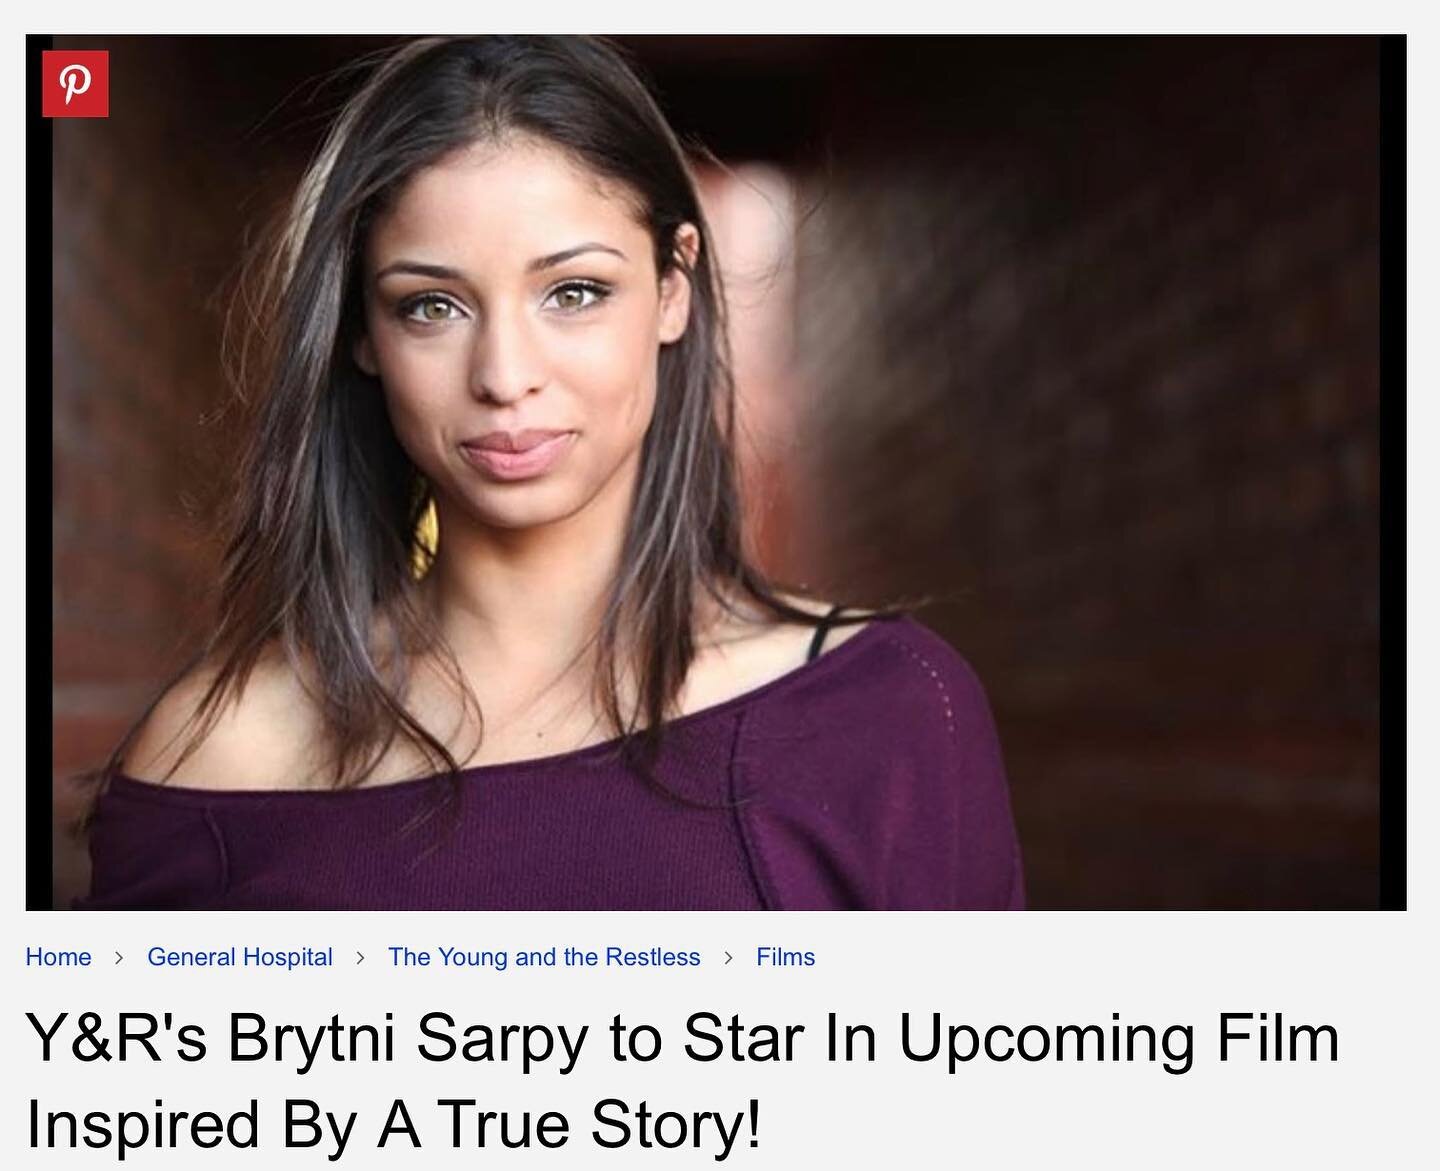 Photo: CBS

The Young and the Restless' Brytni Sarpy (Elena Dawson) is currently working on an upcoming film called, The Prince of Detroit. Sarpy plays Sydney Barkay.

Inspired by a true story, Tony Fox was born into prosperity, being the son of Amer